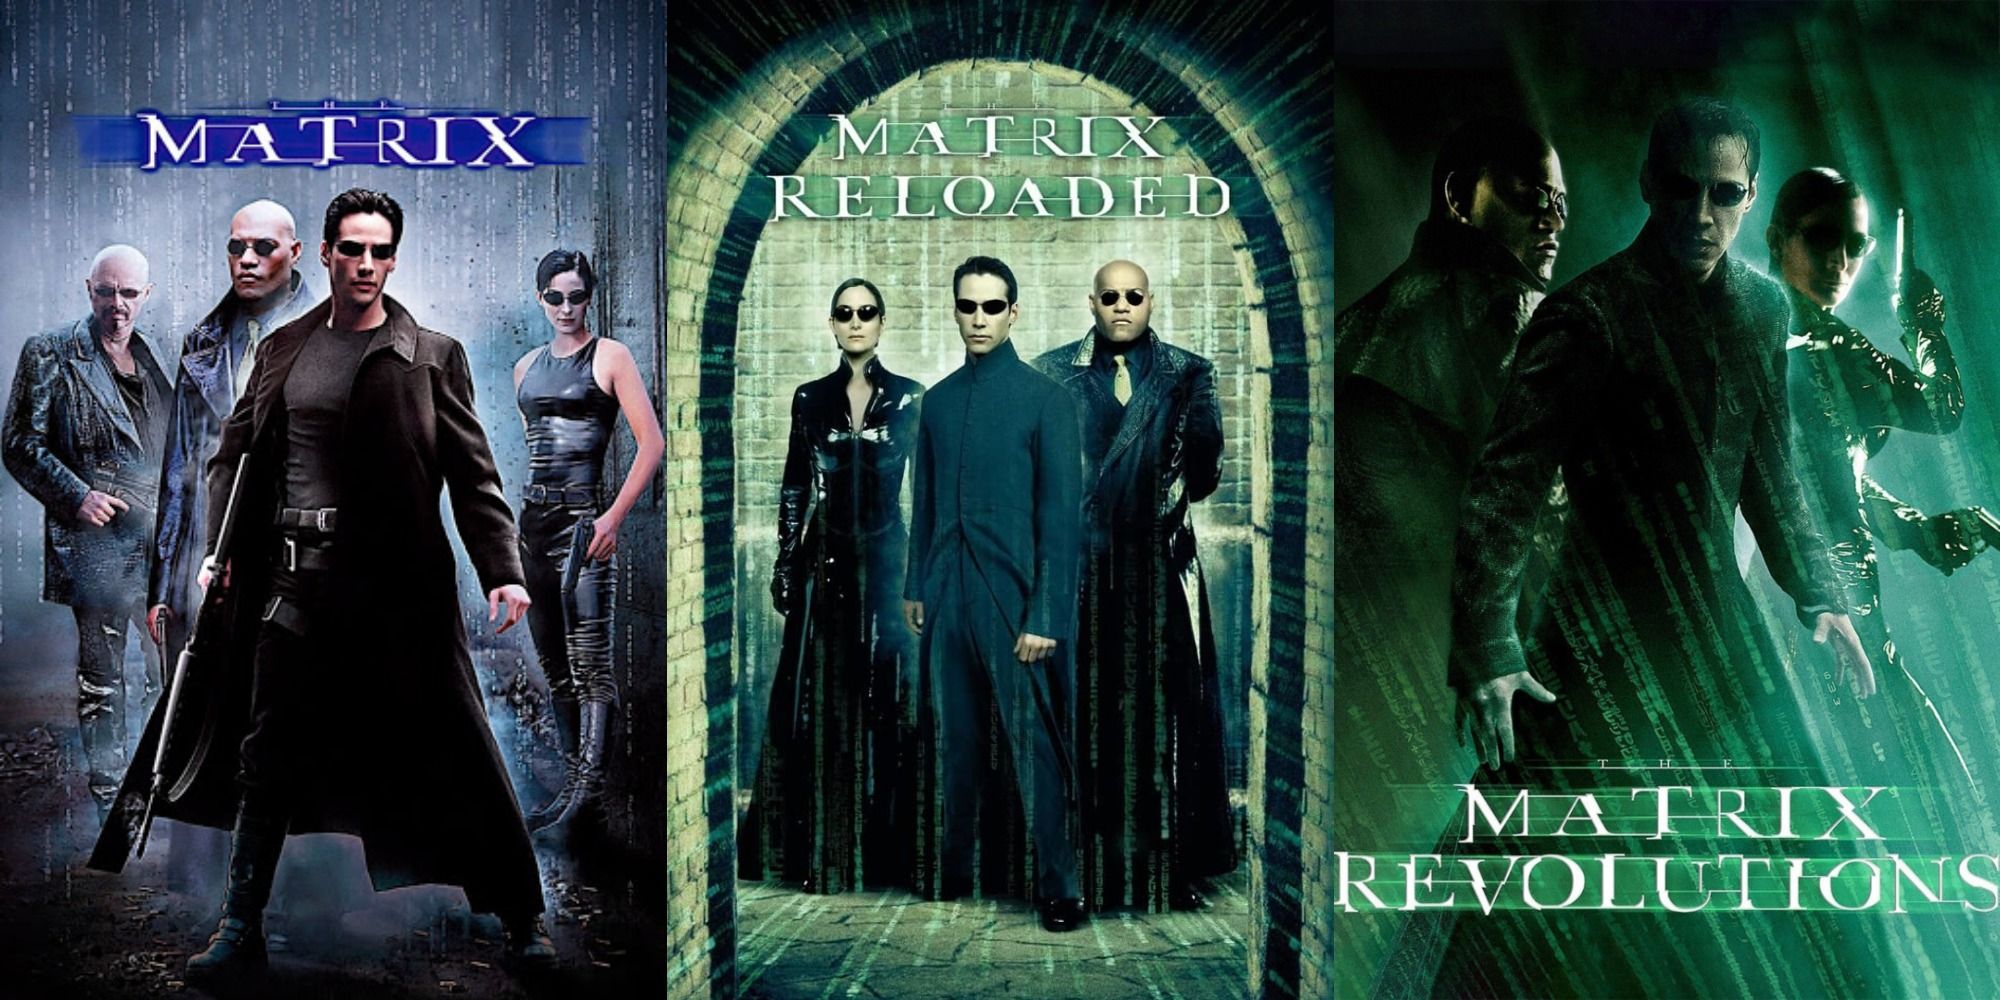 combined posters for Matrix 1,2 and 3 featuring Keanu Reeves, Carrie-Anne Moss, Laurence Fishburne